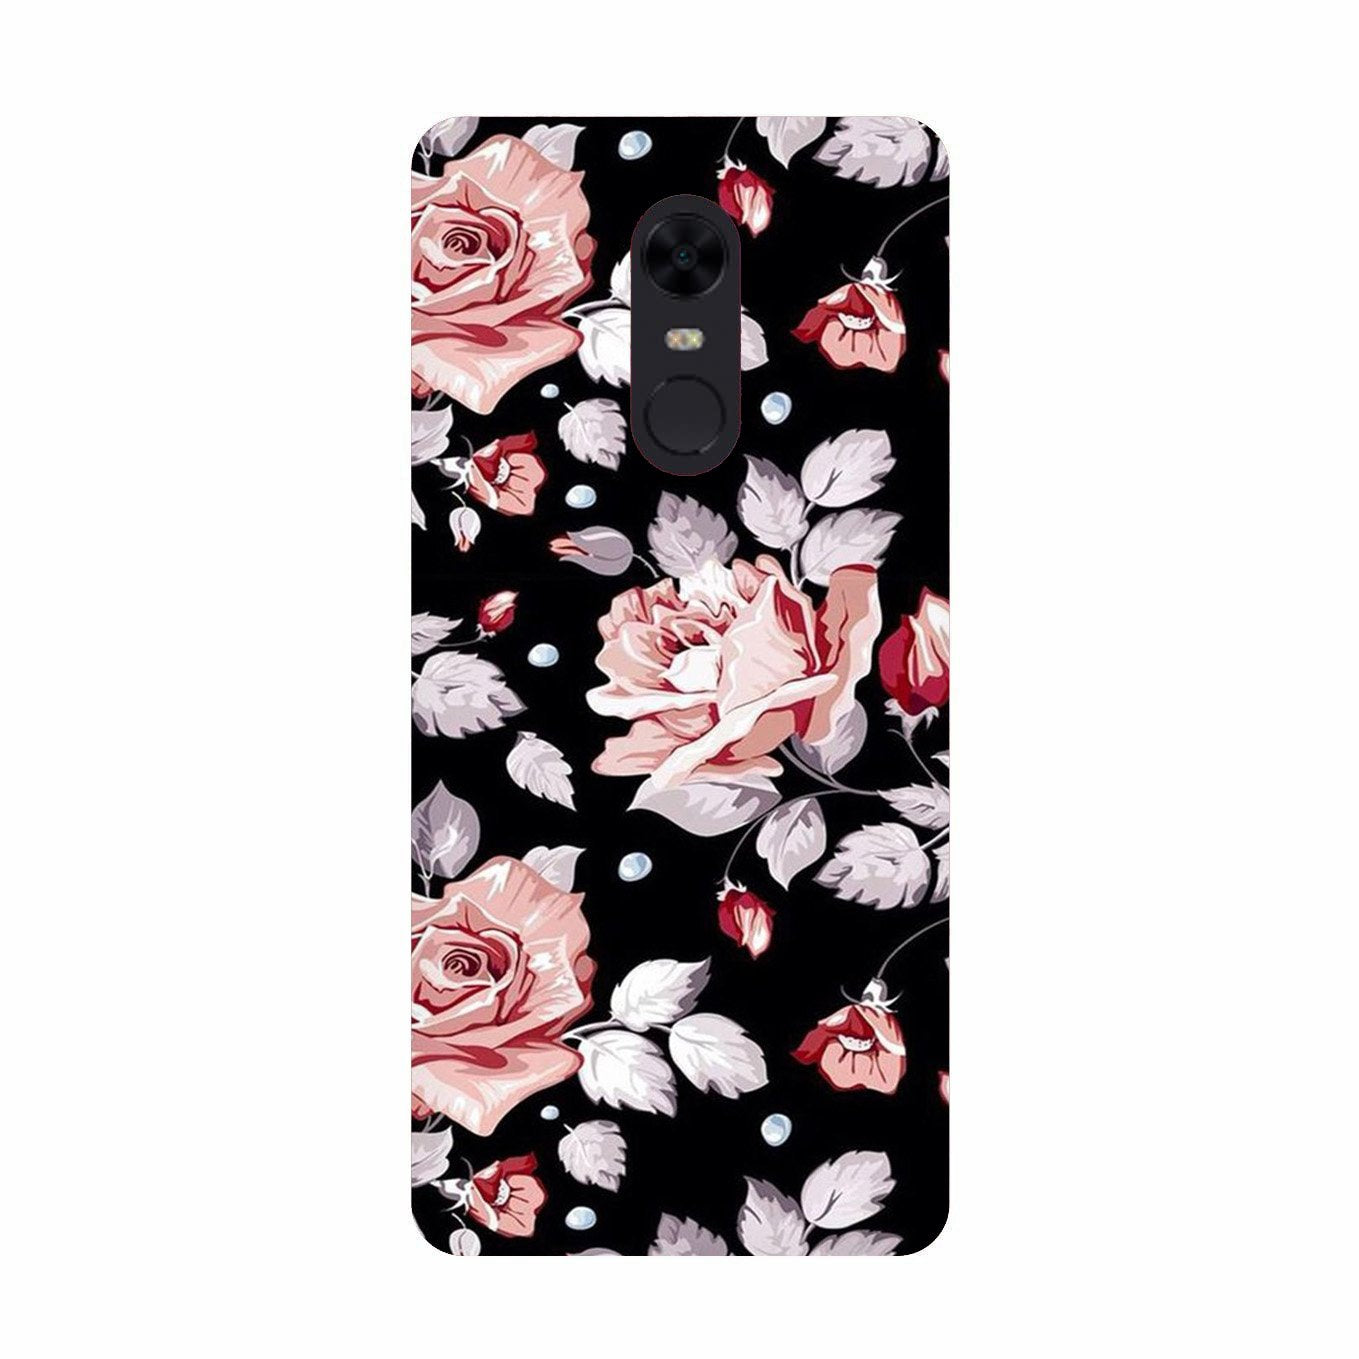 Pink rose Case for Redmi Note 5